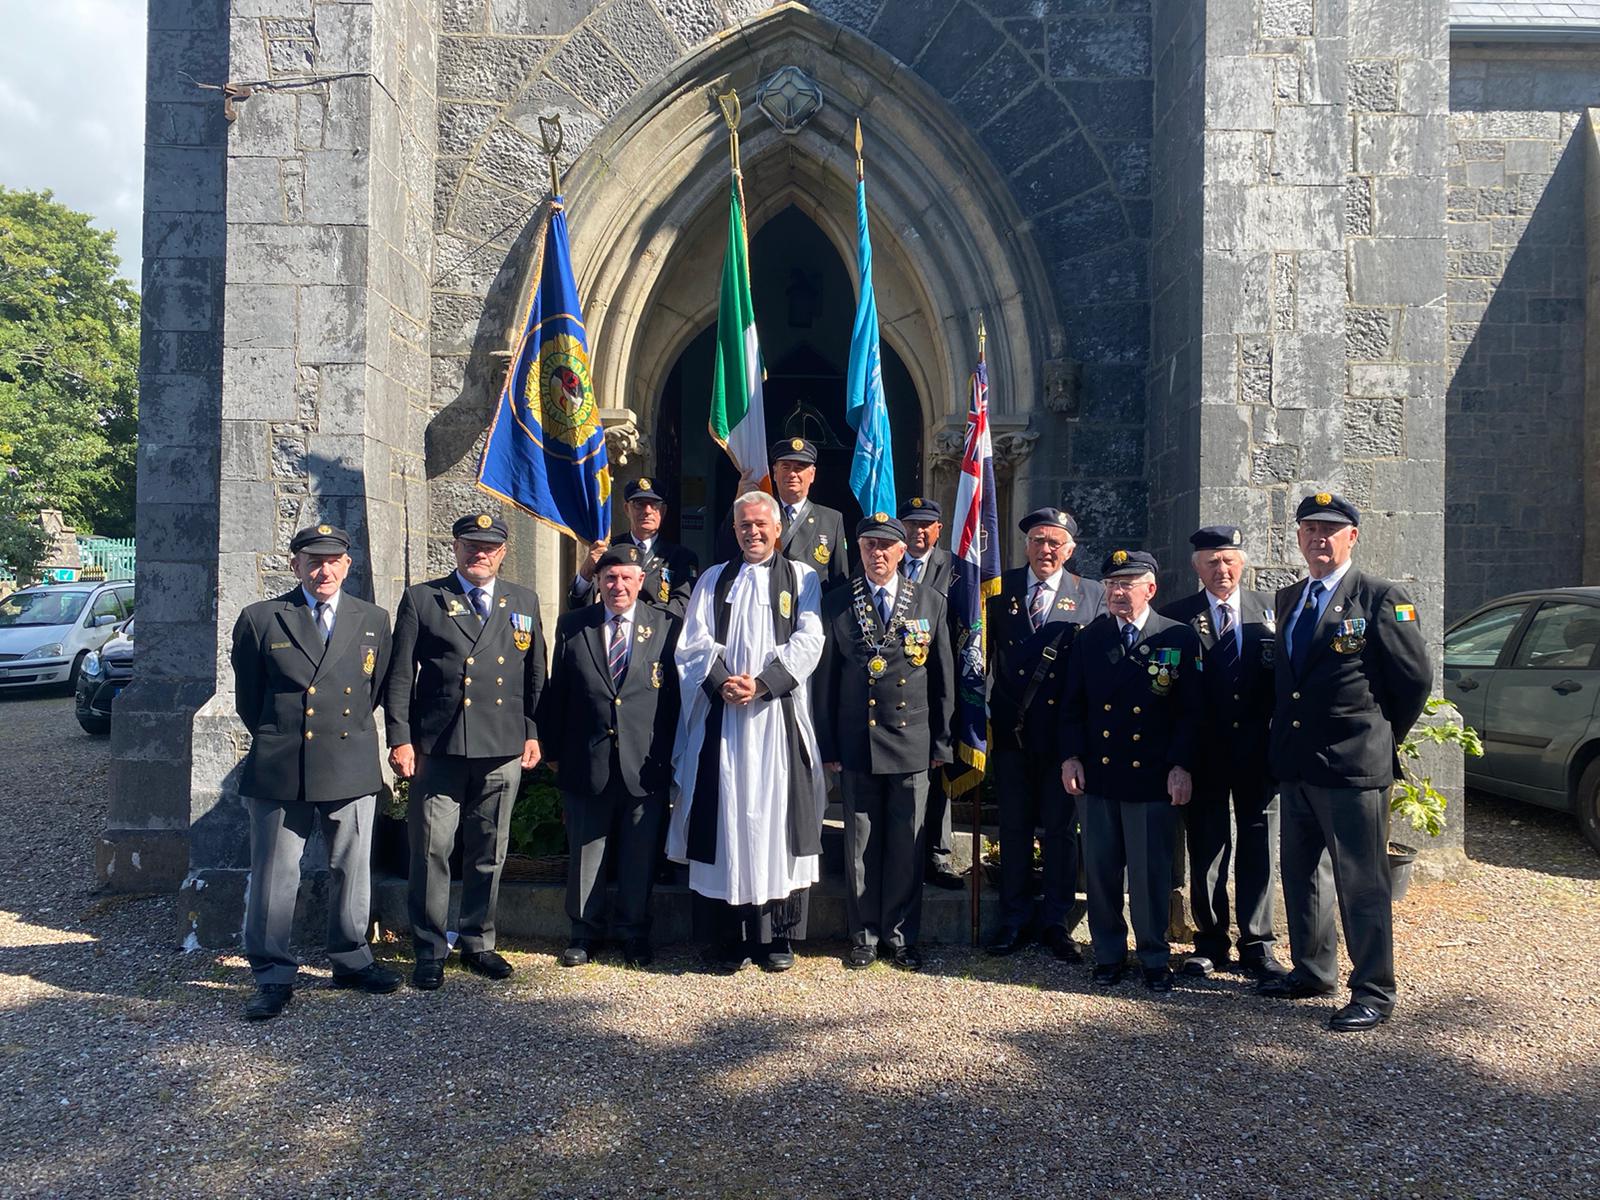 The Revd Canon Paul Arbuthnot, Rector of Cobh and Glanmire Union of Parishes with representatives of Cobh ONE and the Royal Naval Association at Christ Church, Rushbrooke.